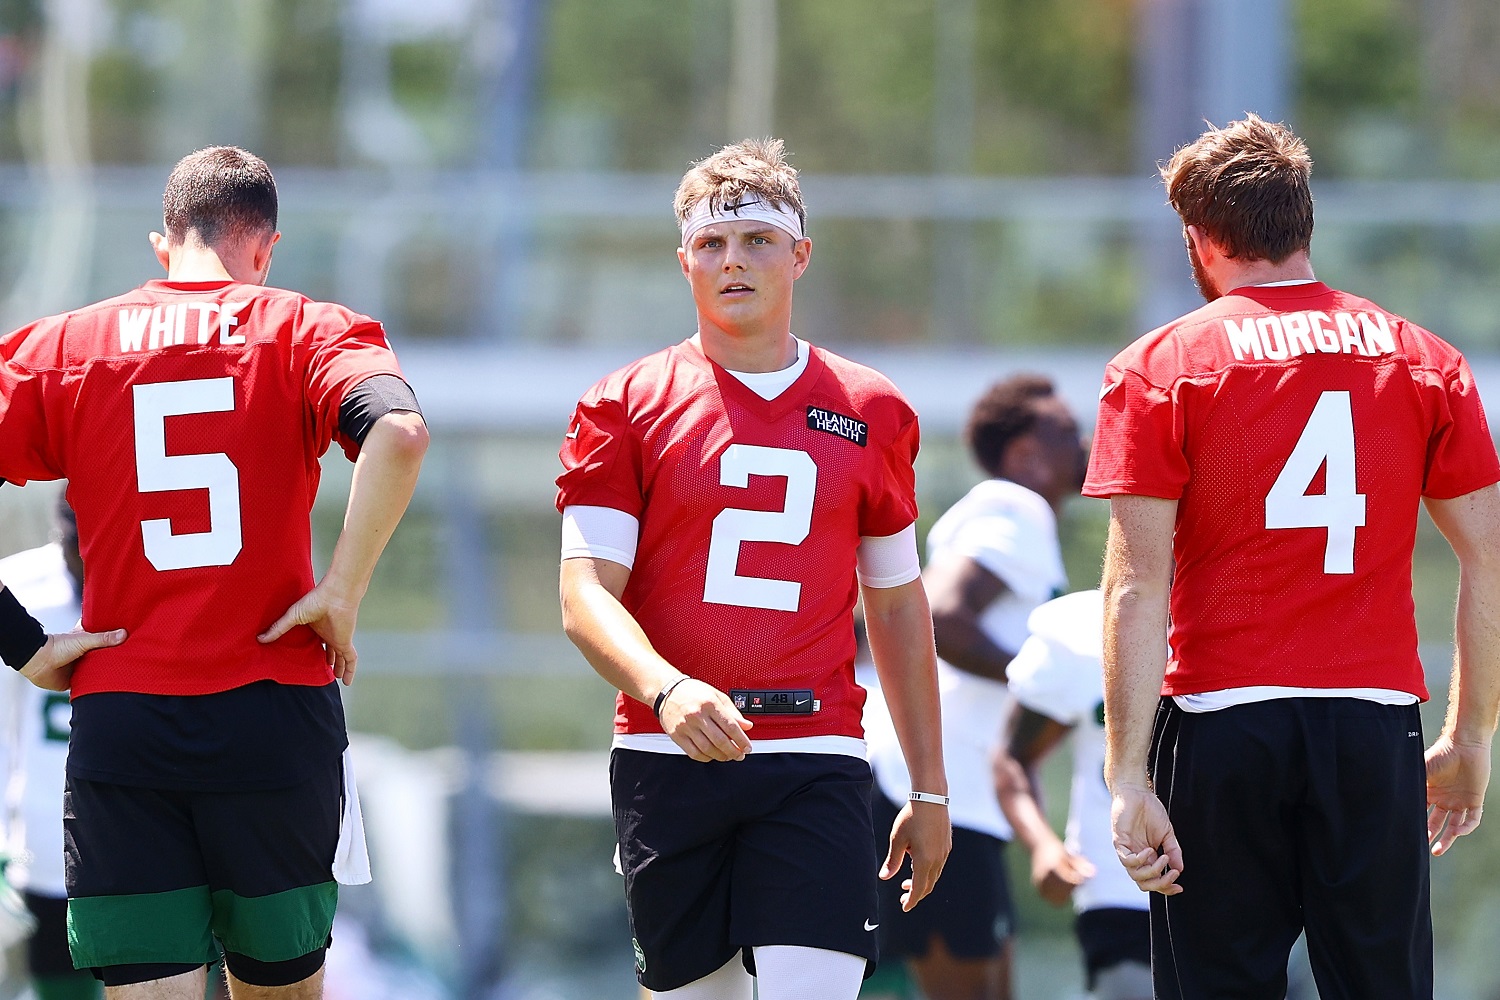 Zach Wilson, center, is in line to start at quarterback in Week 1 after the New York Jets made him the No. 2 overall pick of the 2021 NFL draft.